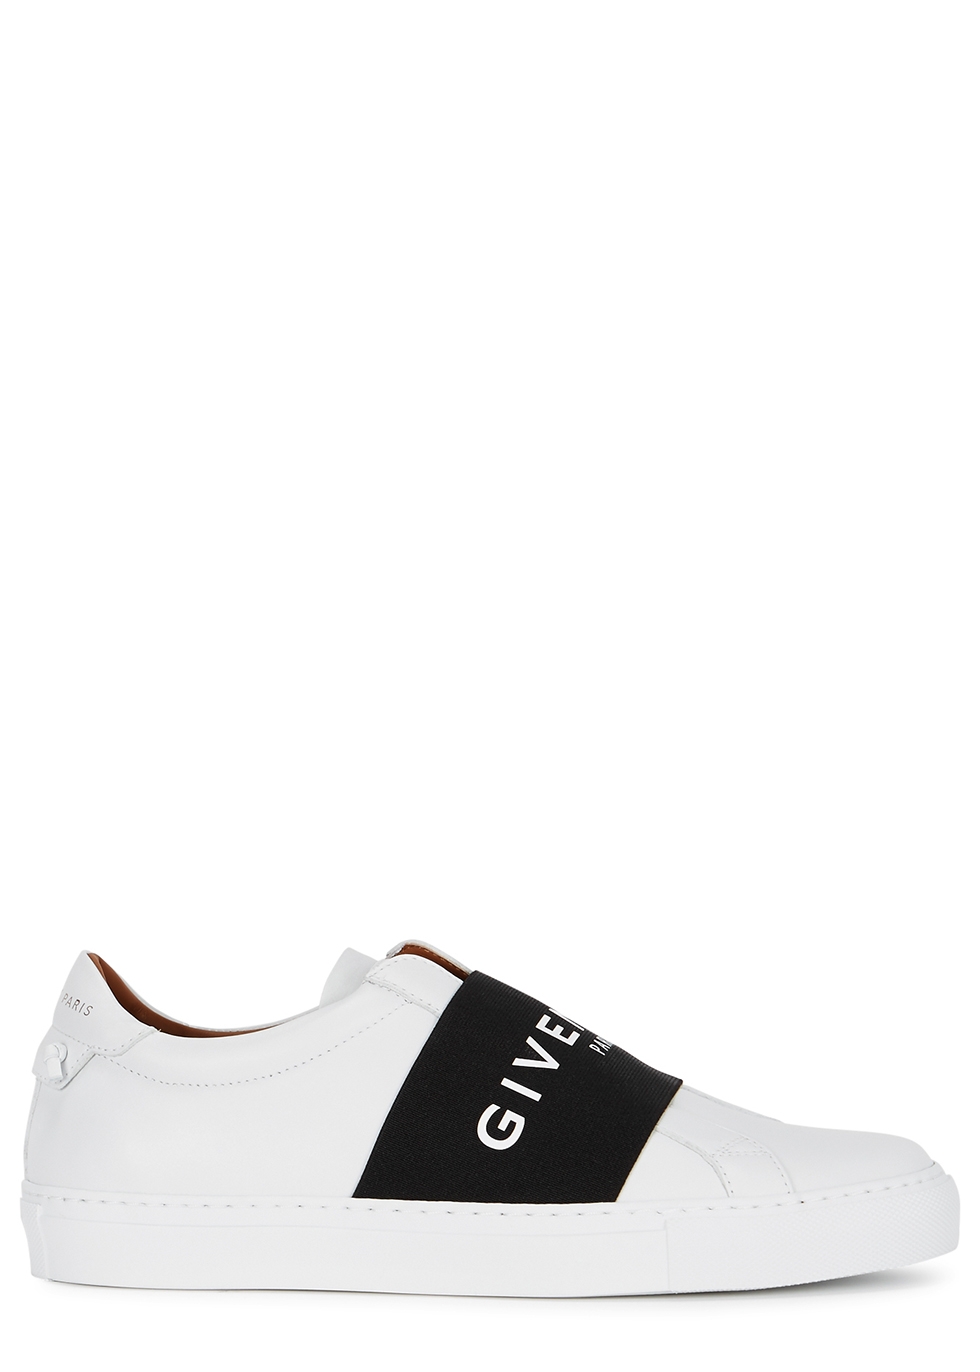 Givenchy Trainers Top Sellers, 55% OFF | www.vetyvet.com